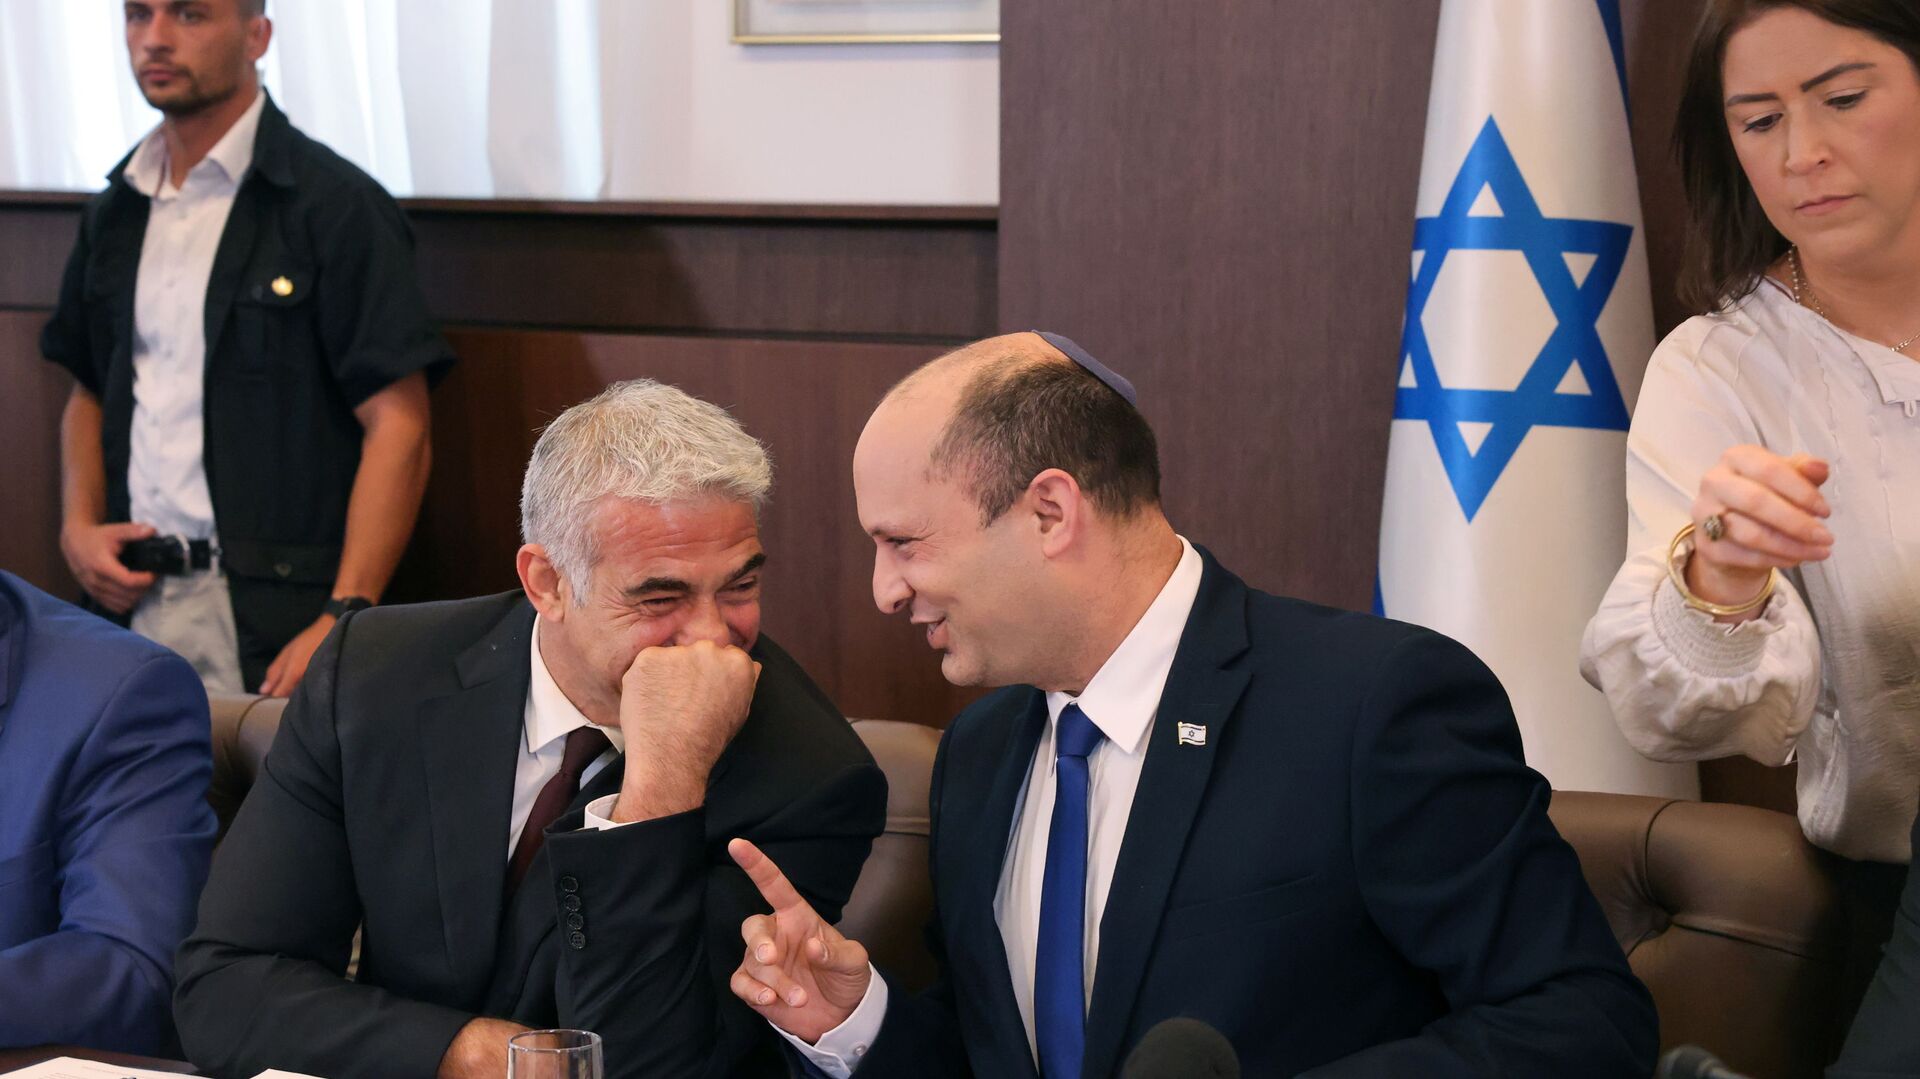 Israeli Prime Minister Naftali Bennett shares a joke with alternate Prime Minister and Foreign Minister Yair Lapid during the first weekly cabinet meeting of their new government in Jerusalem June 20, 2021. - Sputnik International, 1920, 06.04.2022